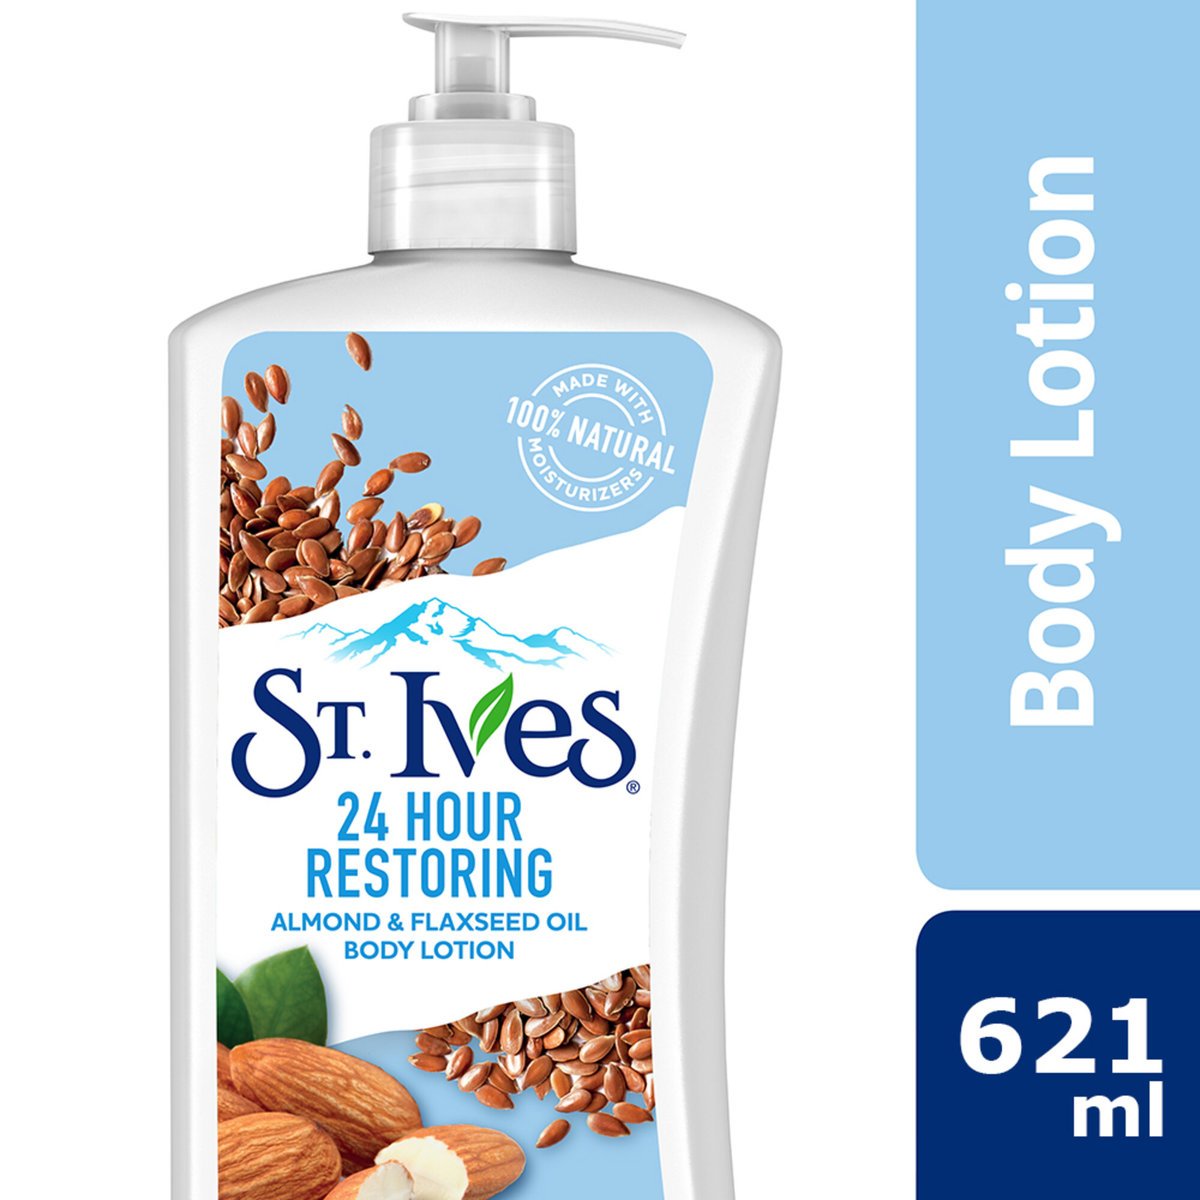 St. Ives 24 Hour Restoring Almond & Flaxseed Oil Body Lotion 621 ml